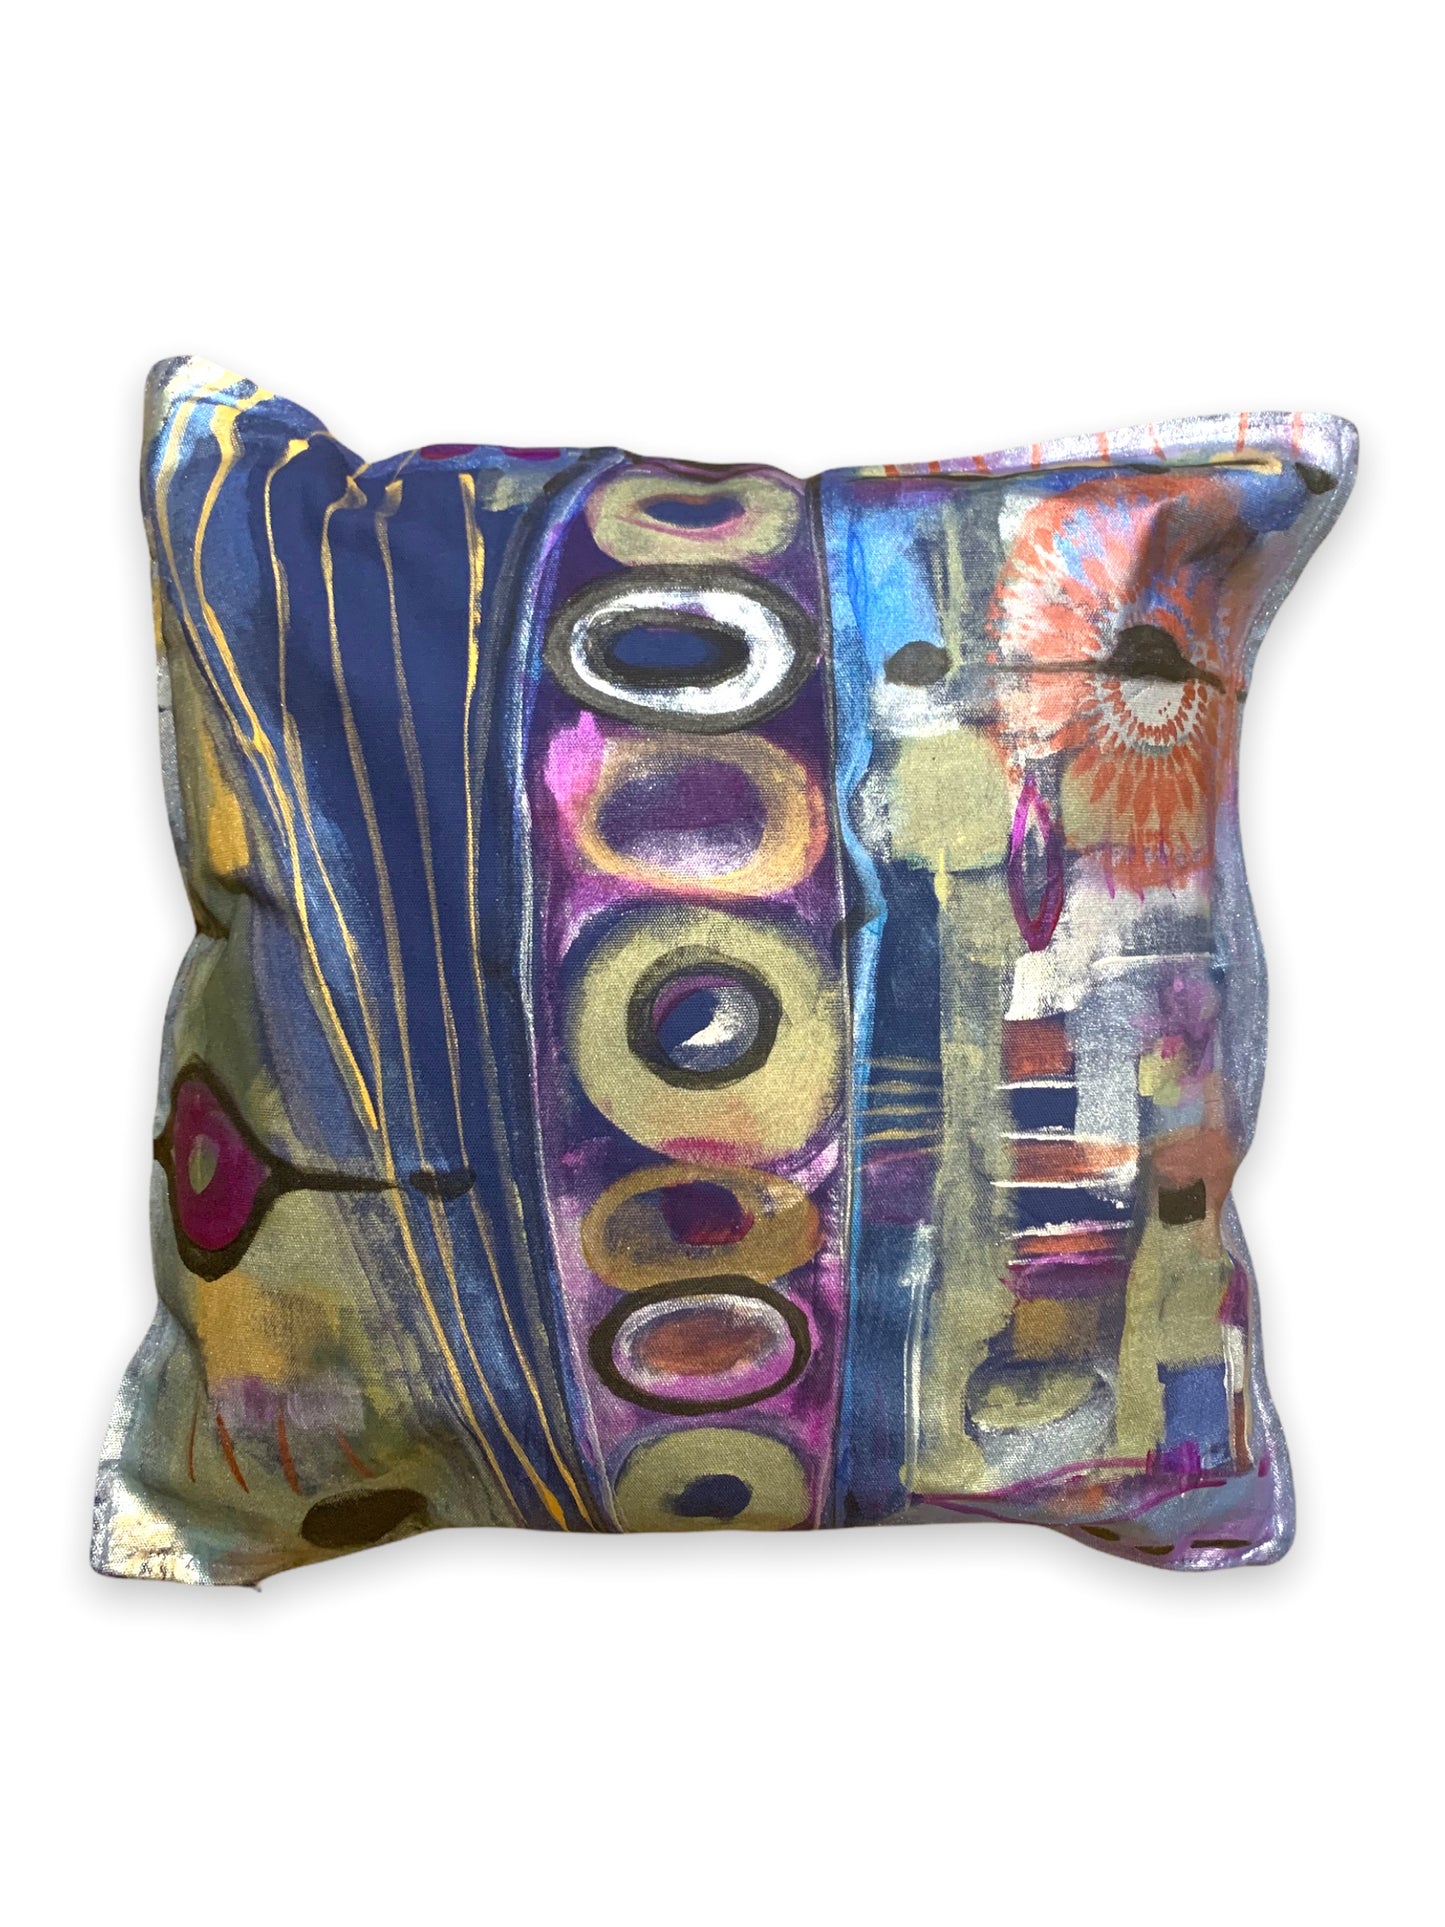 Blue Berry Explosion - Custom Hand Painted Pillow Case